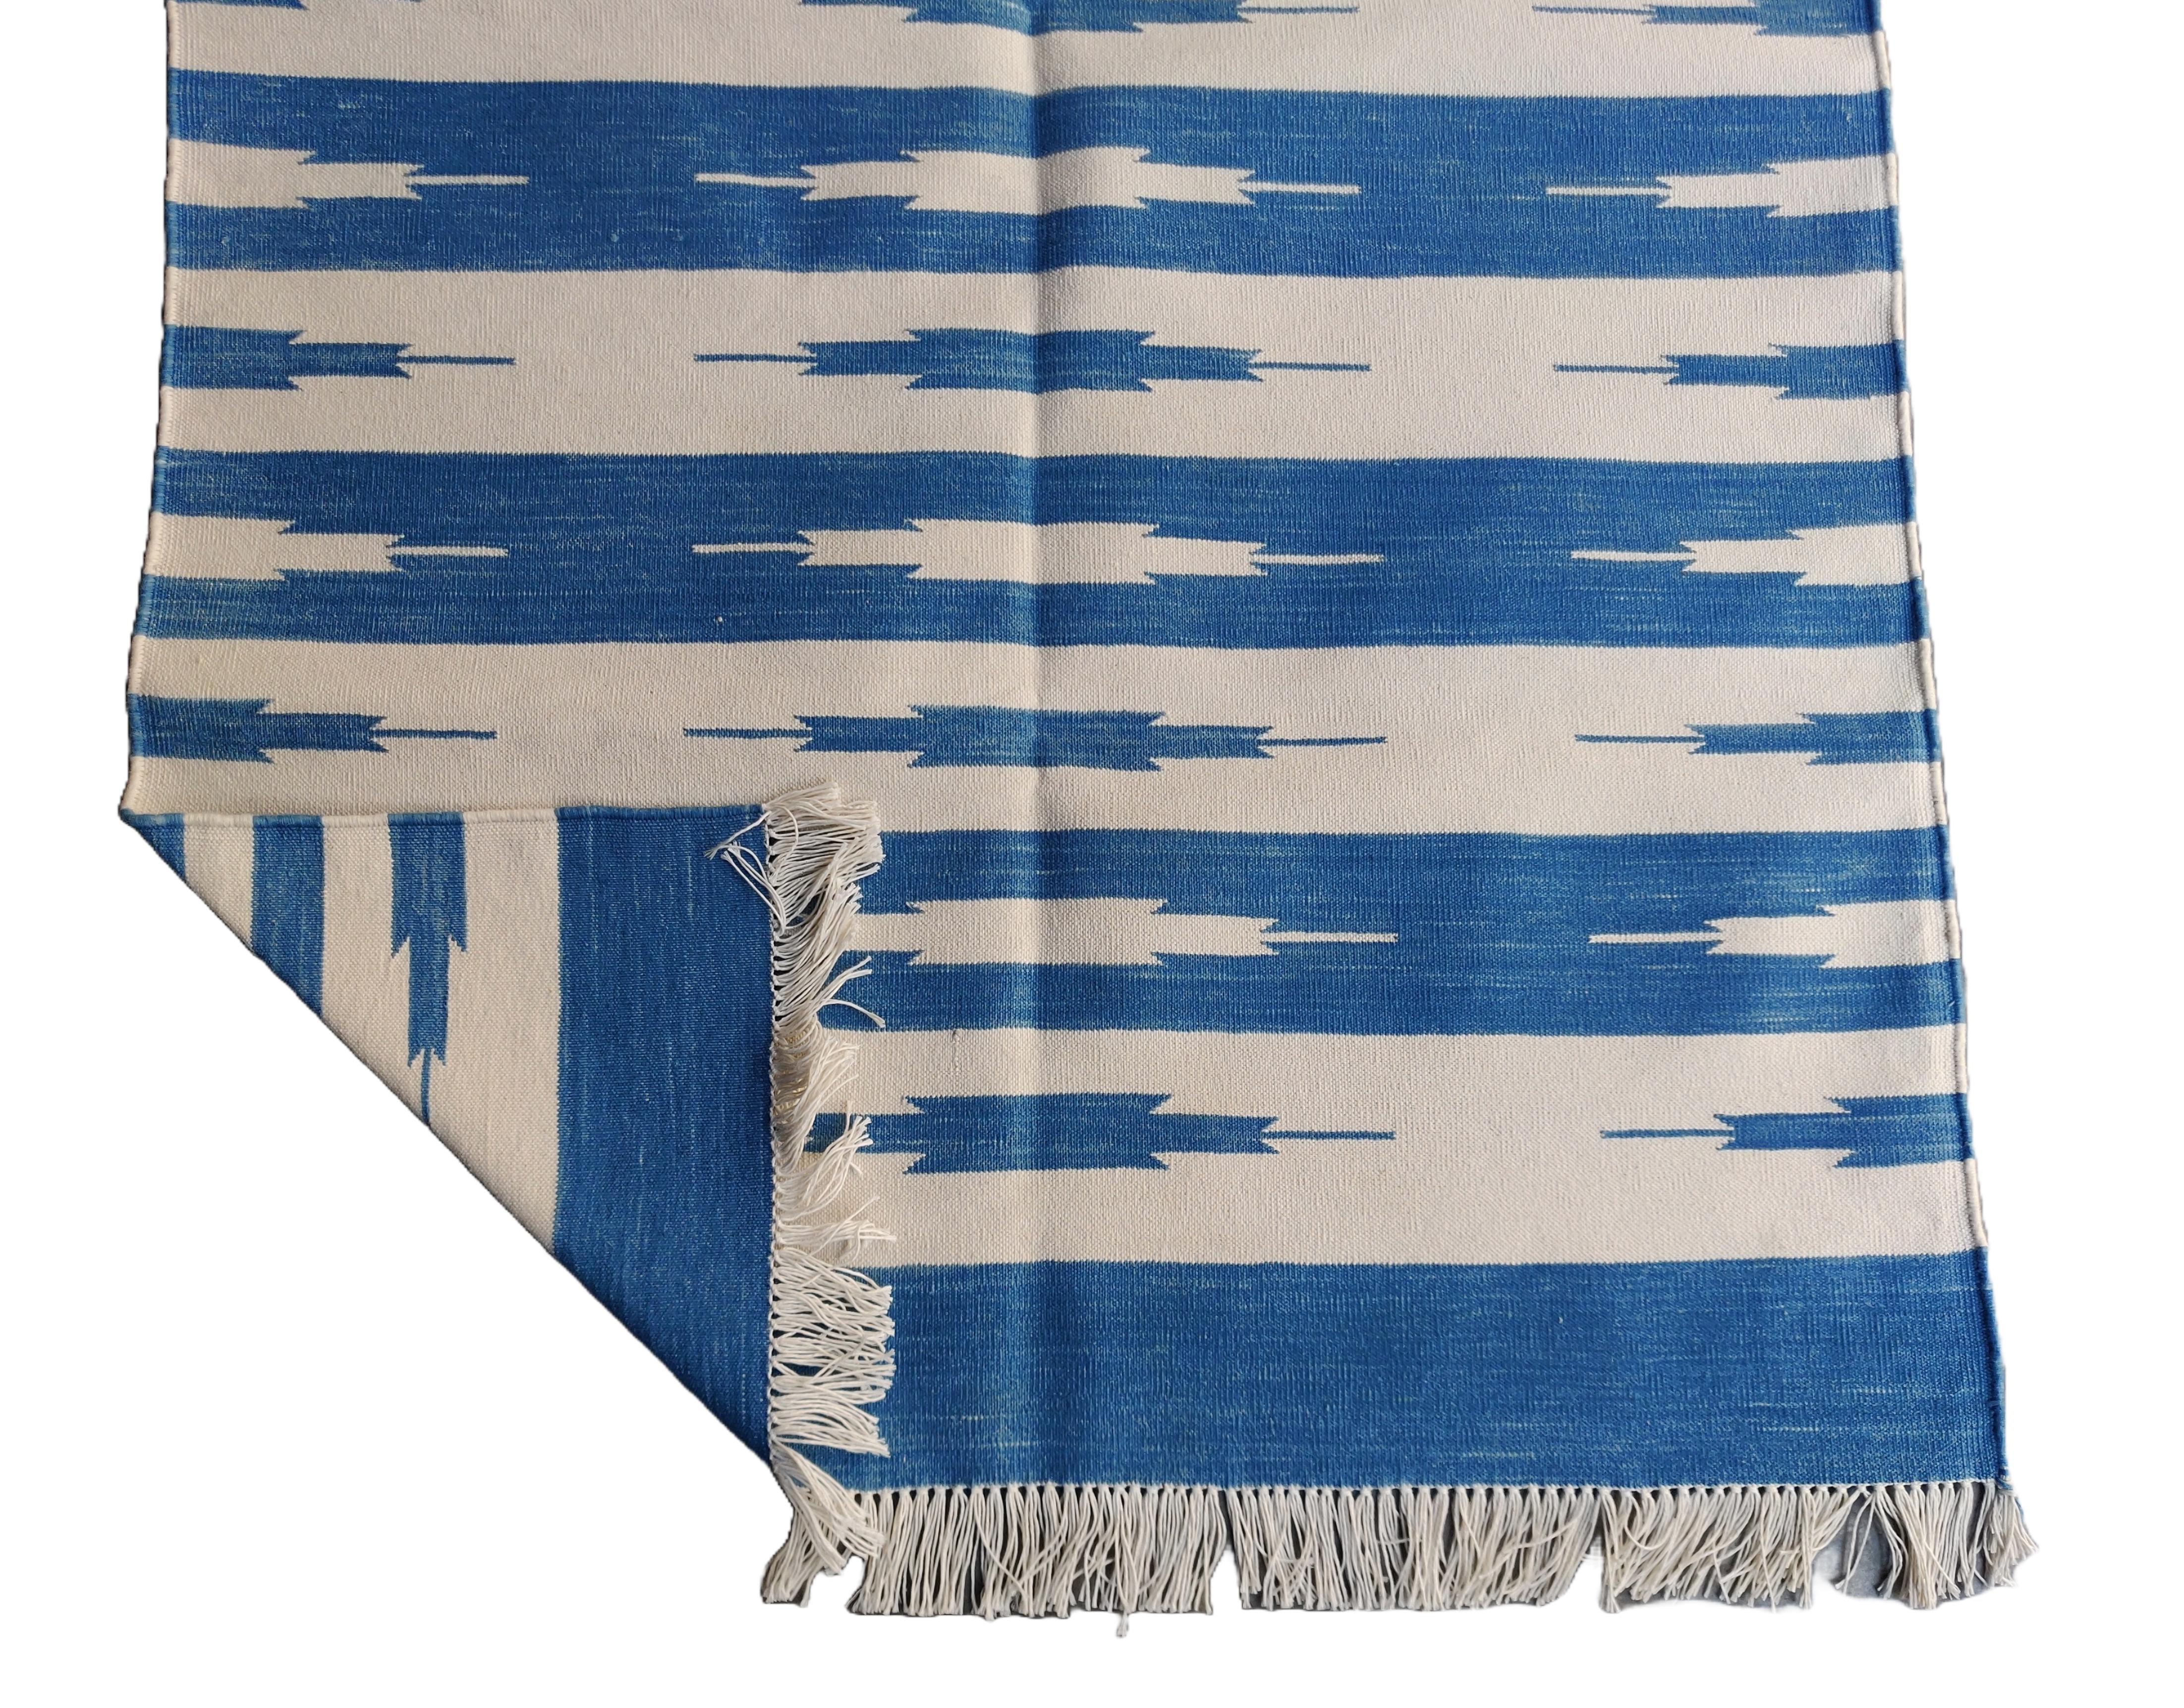 Handmade Cotton Area Flat Weave Rug, 3x5 Blue And White Striped Indian Dhurrie In New Condition For Sale In Jaipur, IN